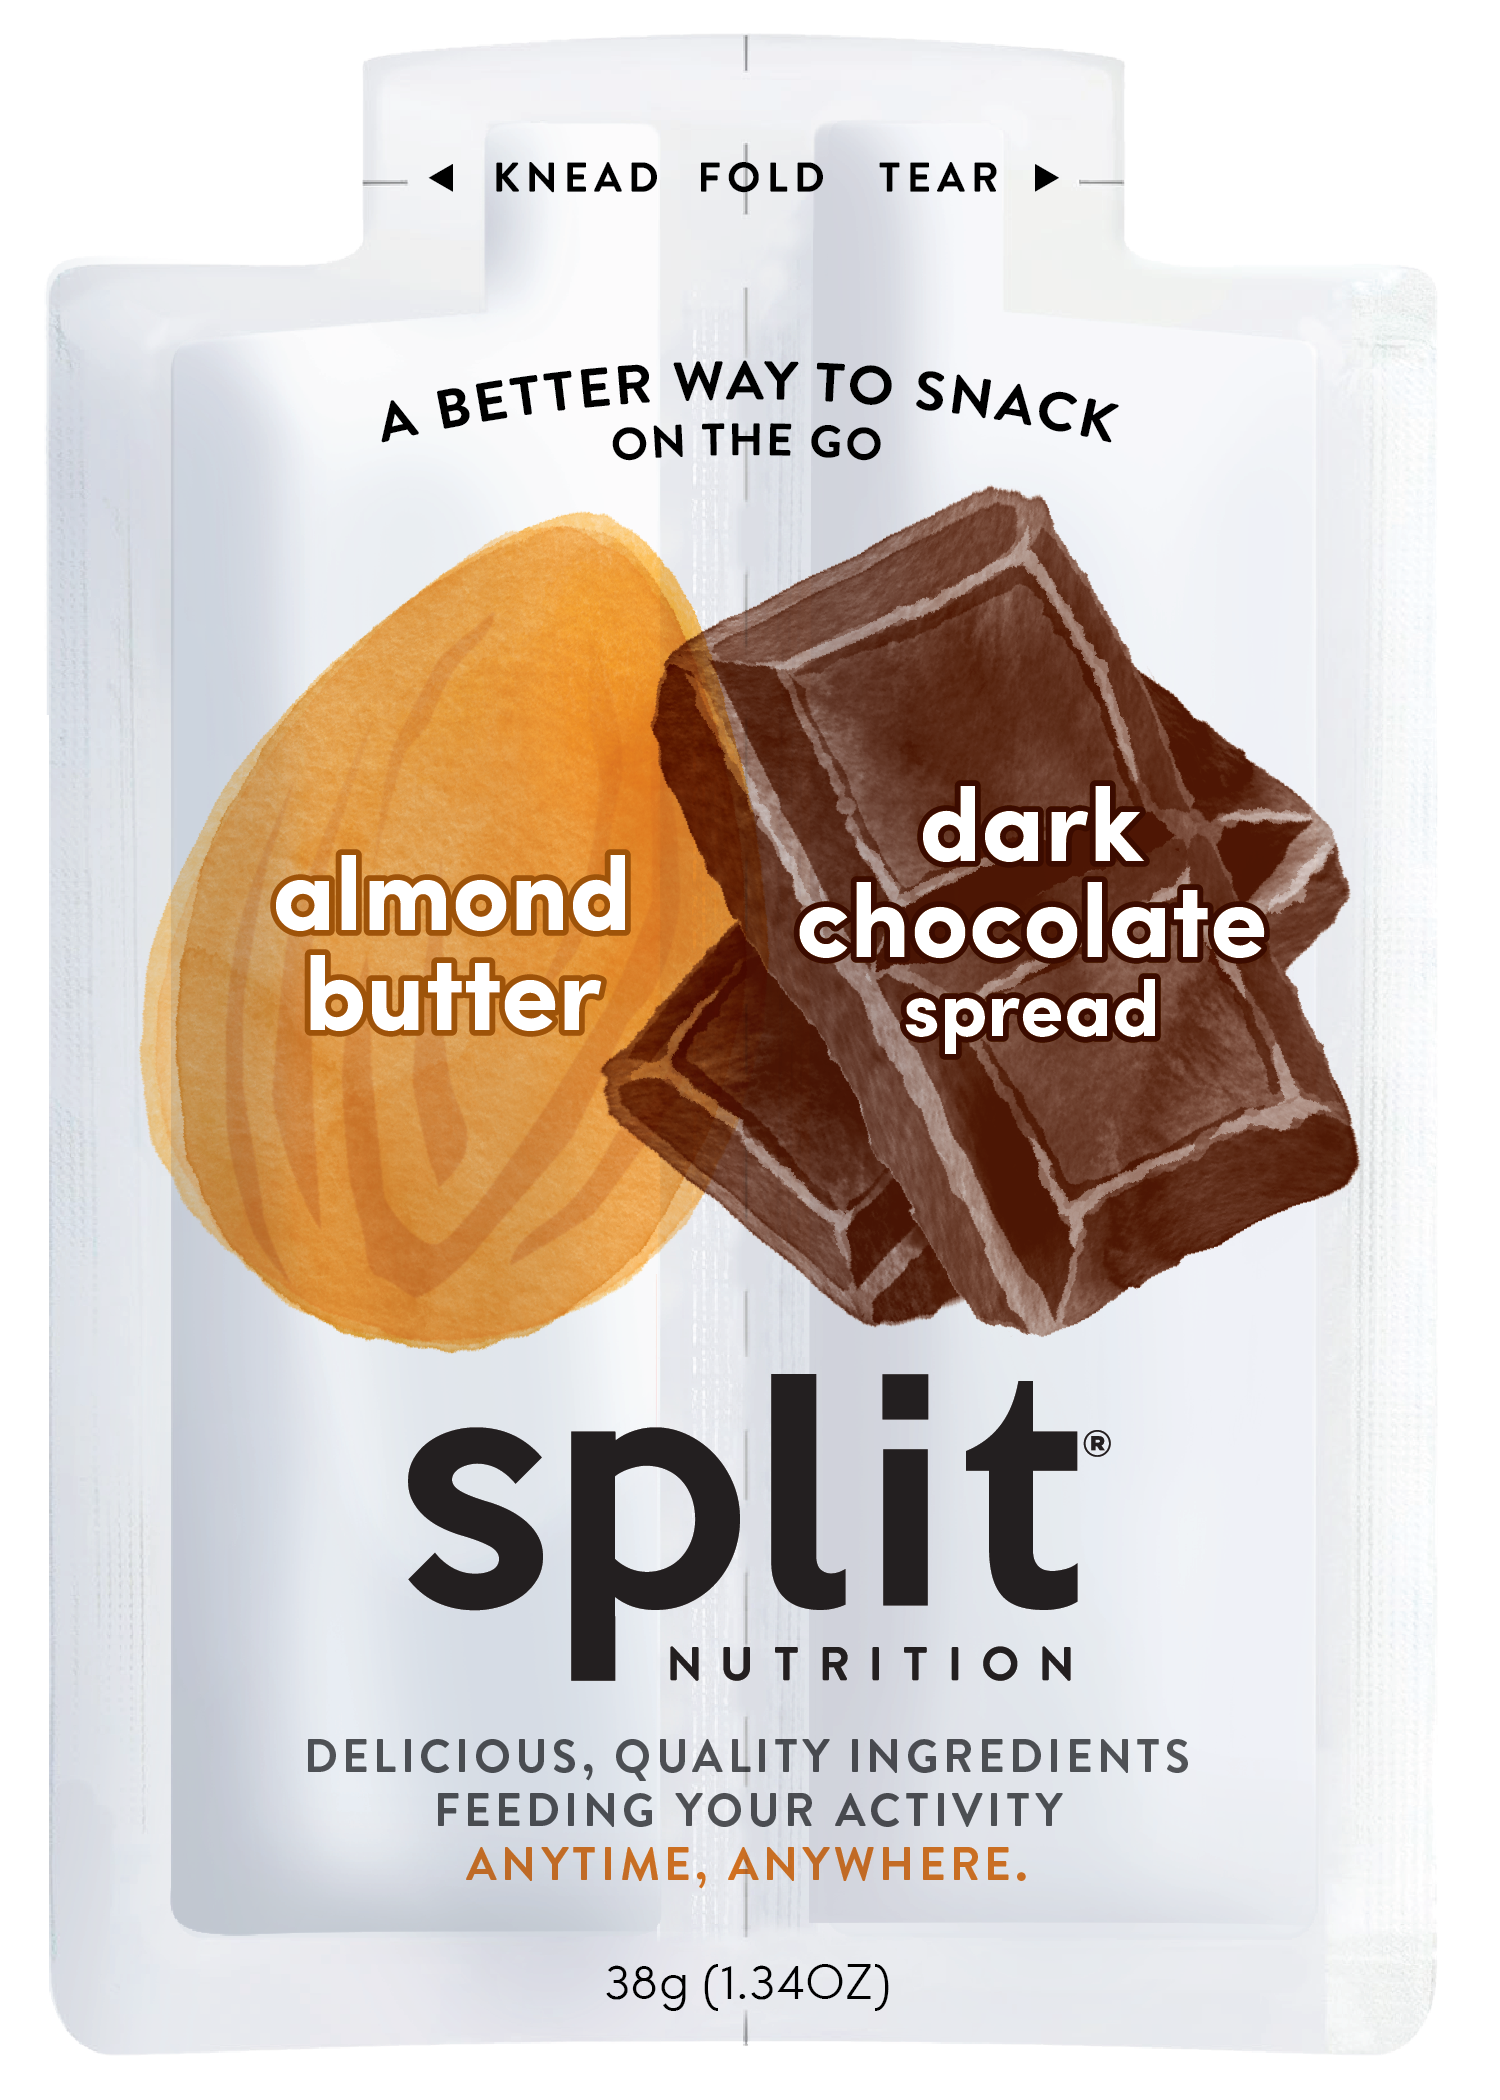 Split Nutrition Almond Butter and Chocolate Spread (10ct box) 6 innerpacks per case 1.4 oz